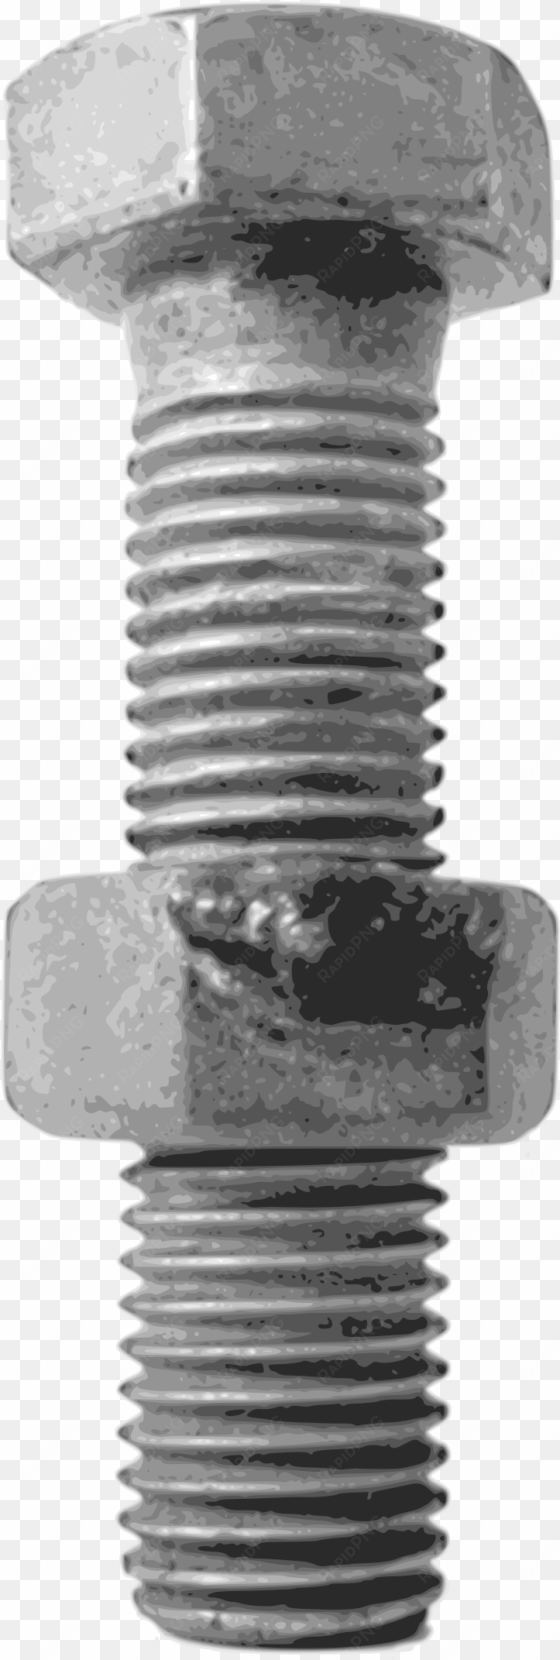 nut clipart animated - bolt and nut png